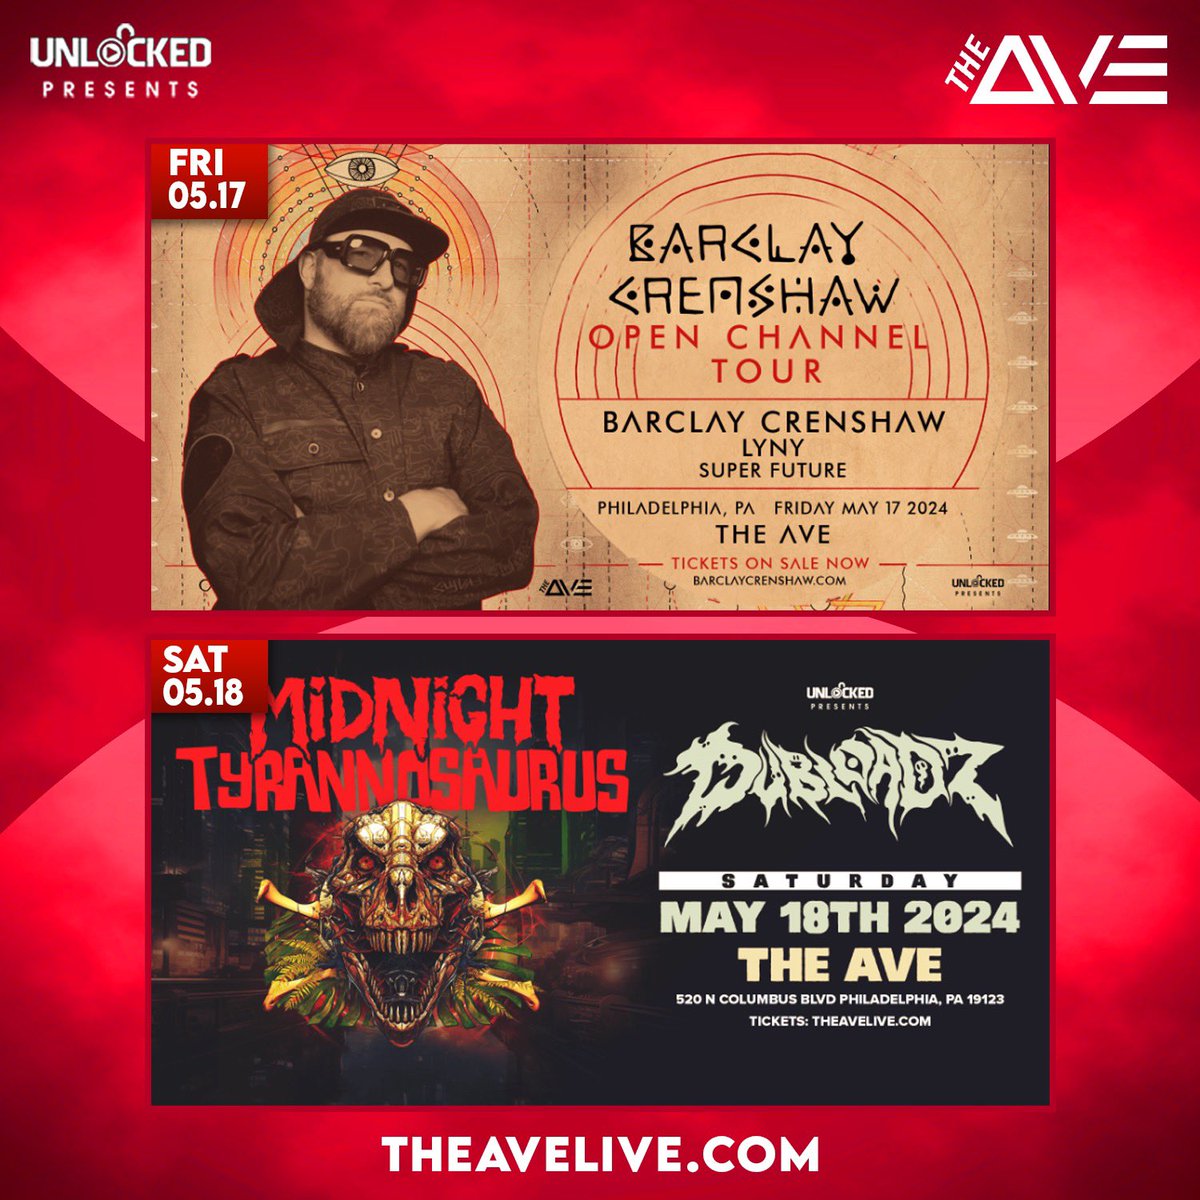 Weekend Lineup 🔥 This Friday Barclay Crenshaw will be coming to #TheAve with support from Lyny and Super Future, plus This Saturday Midnight Tyrannosaurus will be throwing down a killer set with support from Dubloadz - Tickets and Tables at TheAveLive.com